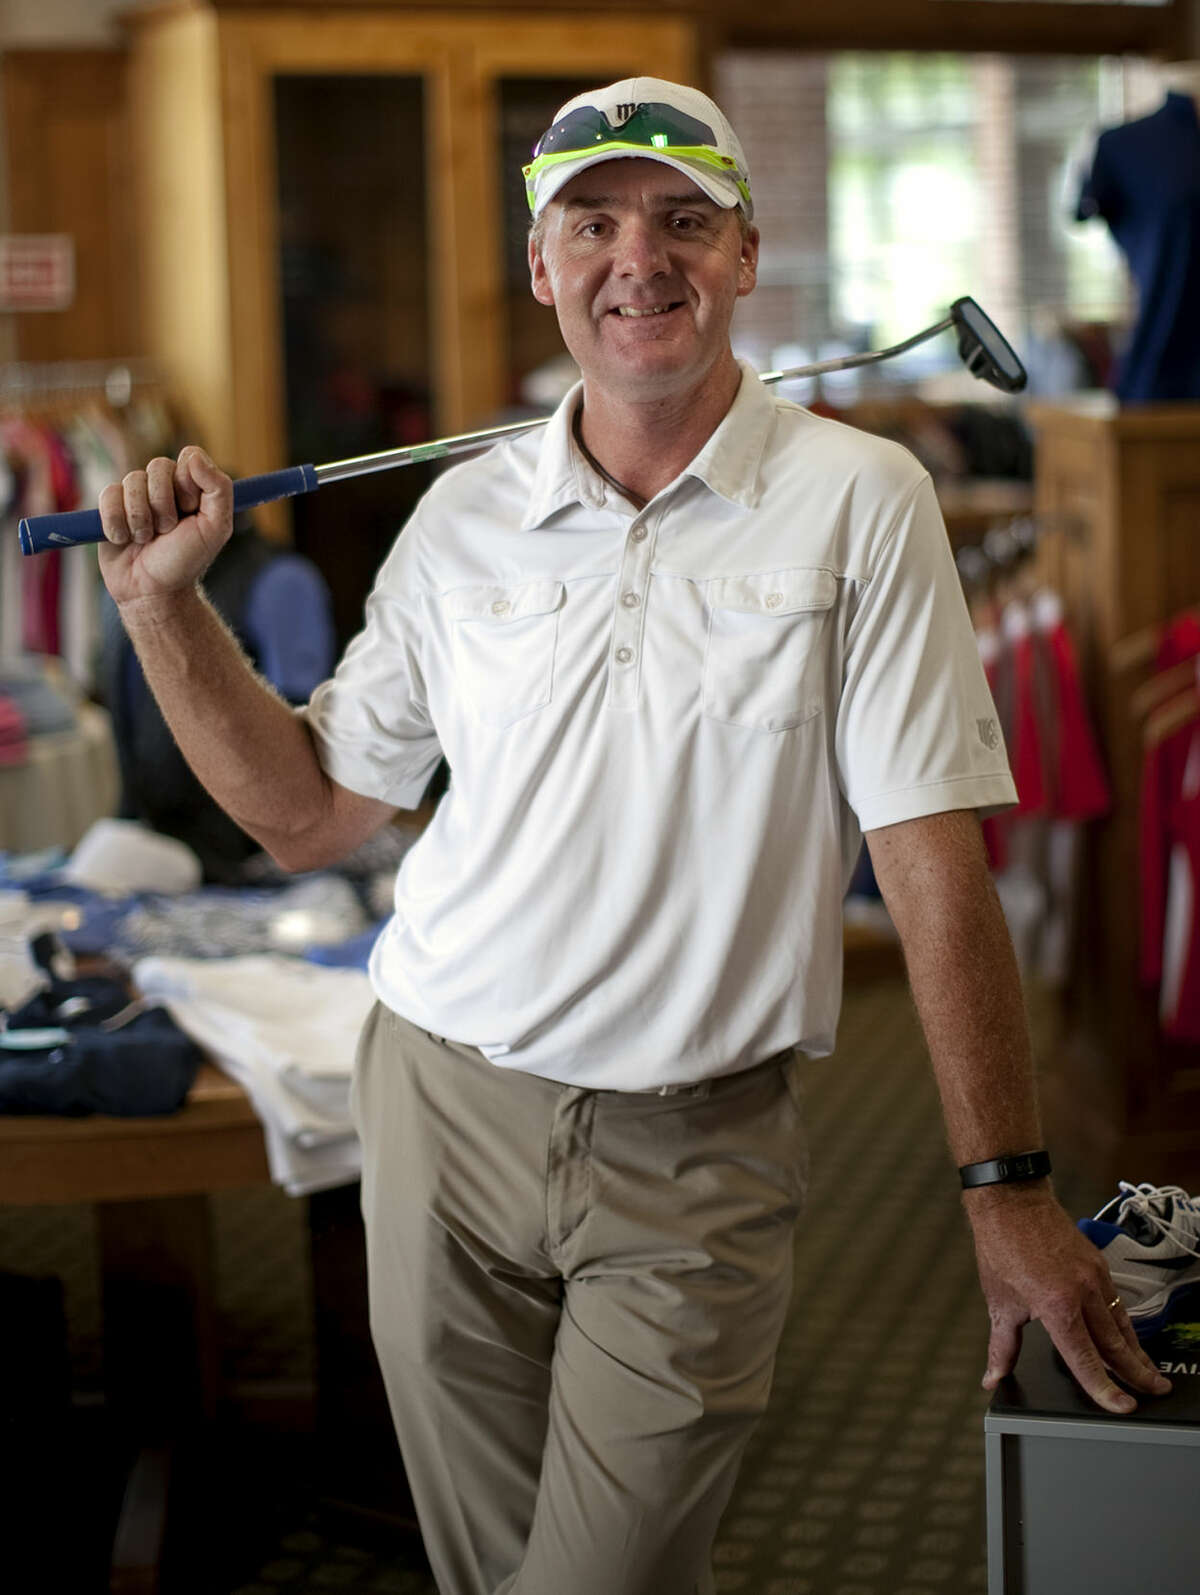 Steven Young, assistant pro at Midland Country Club, in portrait Thursday, July 30, 2015 at the pro shop. James Durbin/Reporter-Telegram